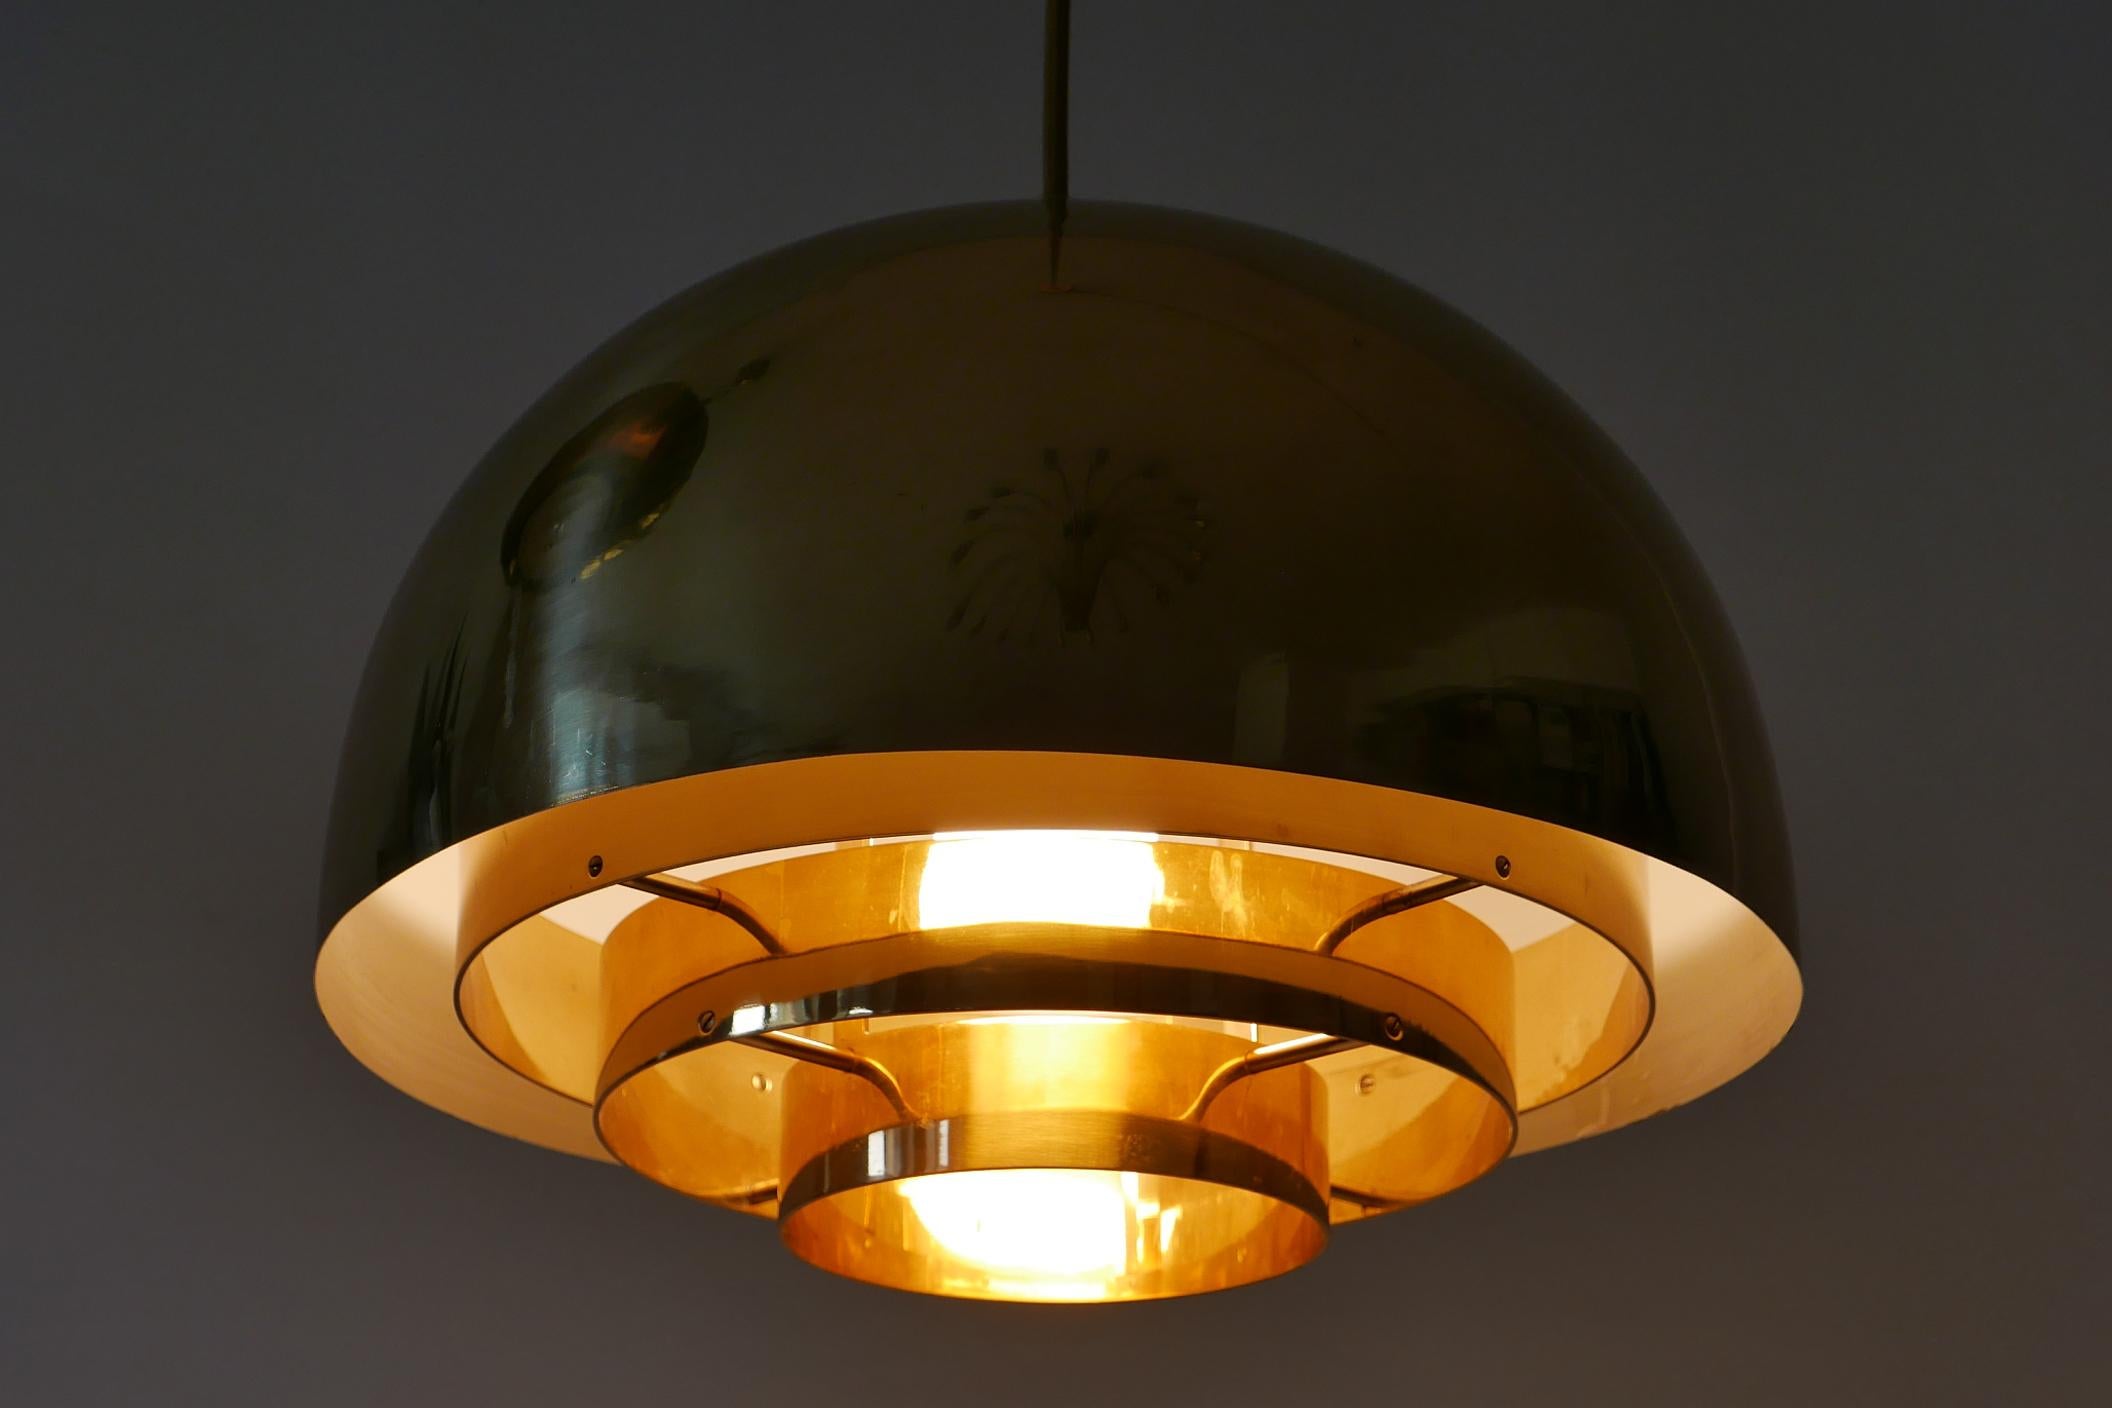 Elegant Mid-Century Modern brass pendant lamp or hanging light 'Dome'. Manufactured by Vereinigte Werkstätten Munich, 1960s, Germany.

Executed in brass sheet, it comes with 1 x E27 Edison screw fit bulb holder, is wired, and in working condition.